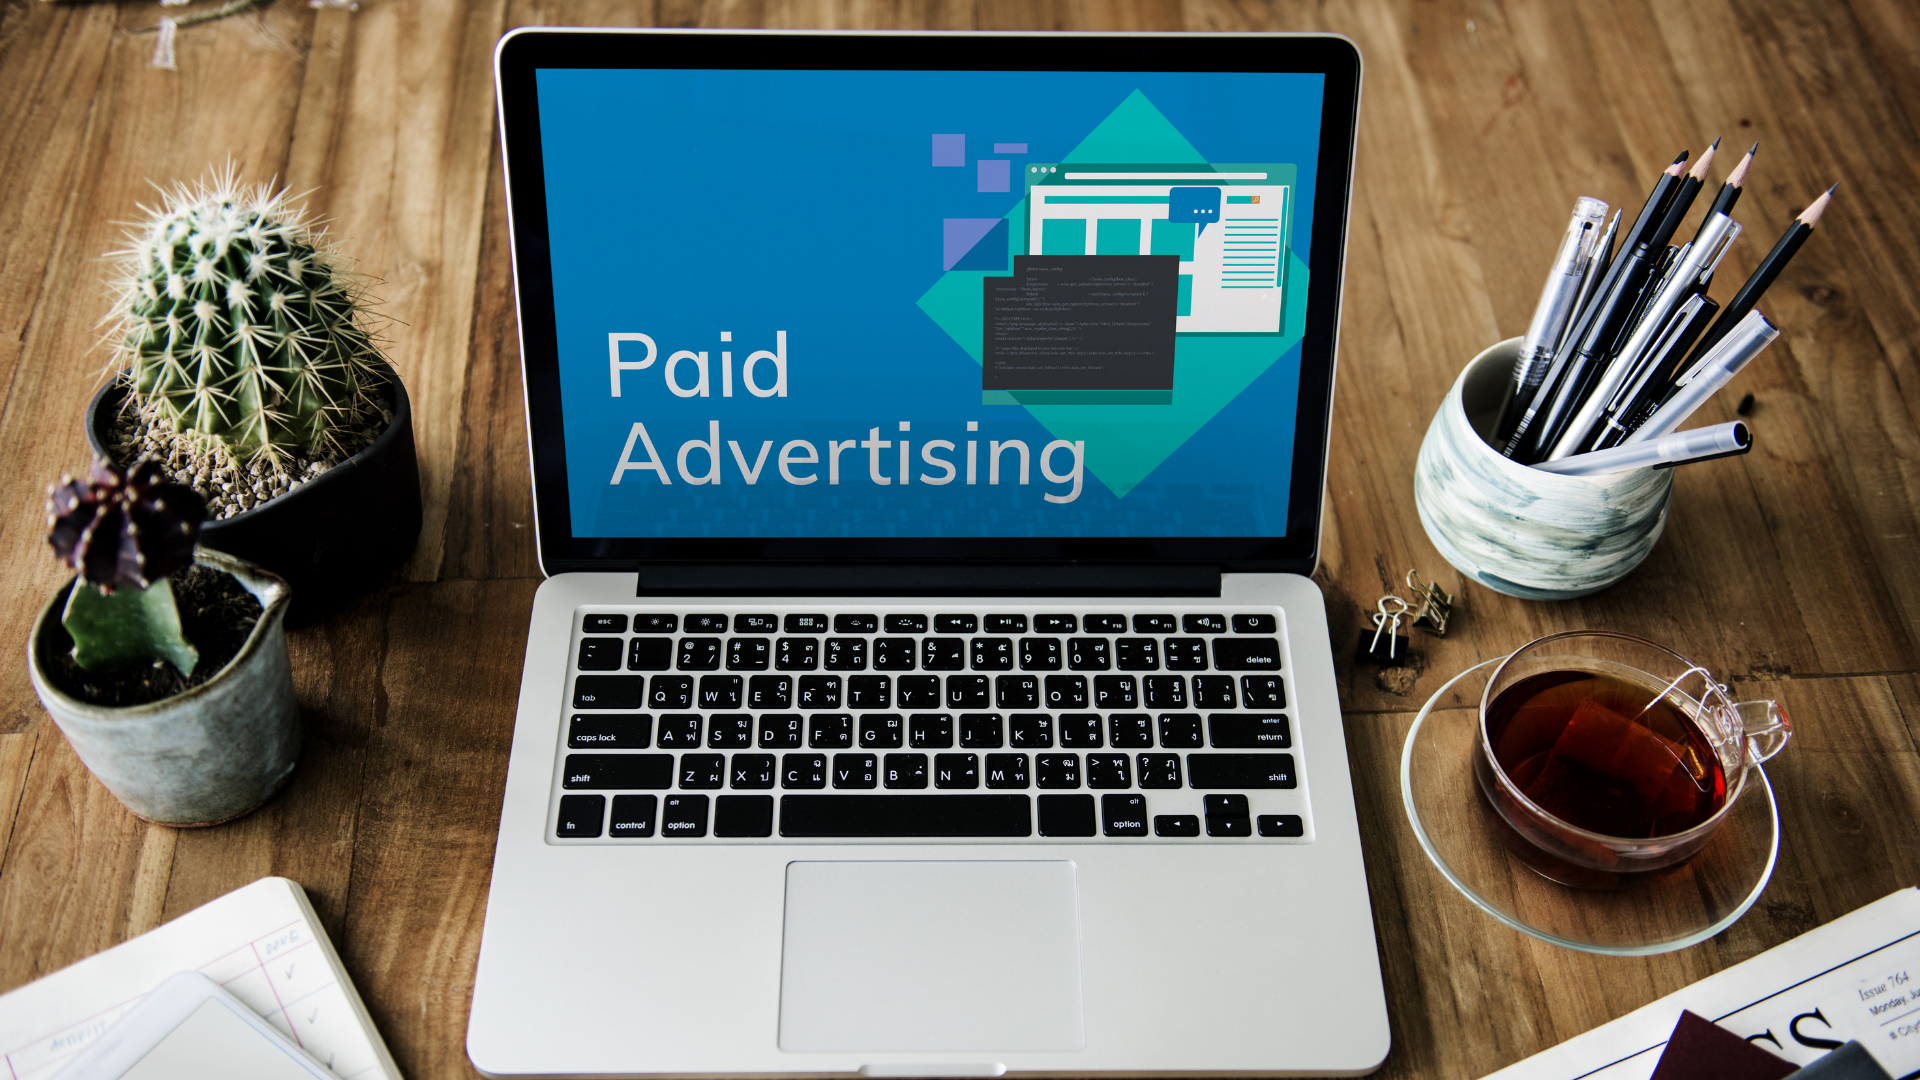 What is a paid advertising strategy?